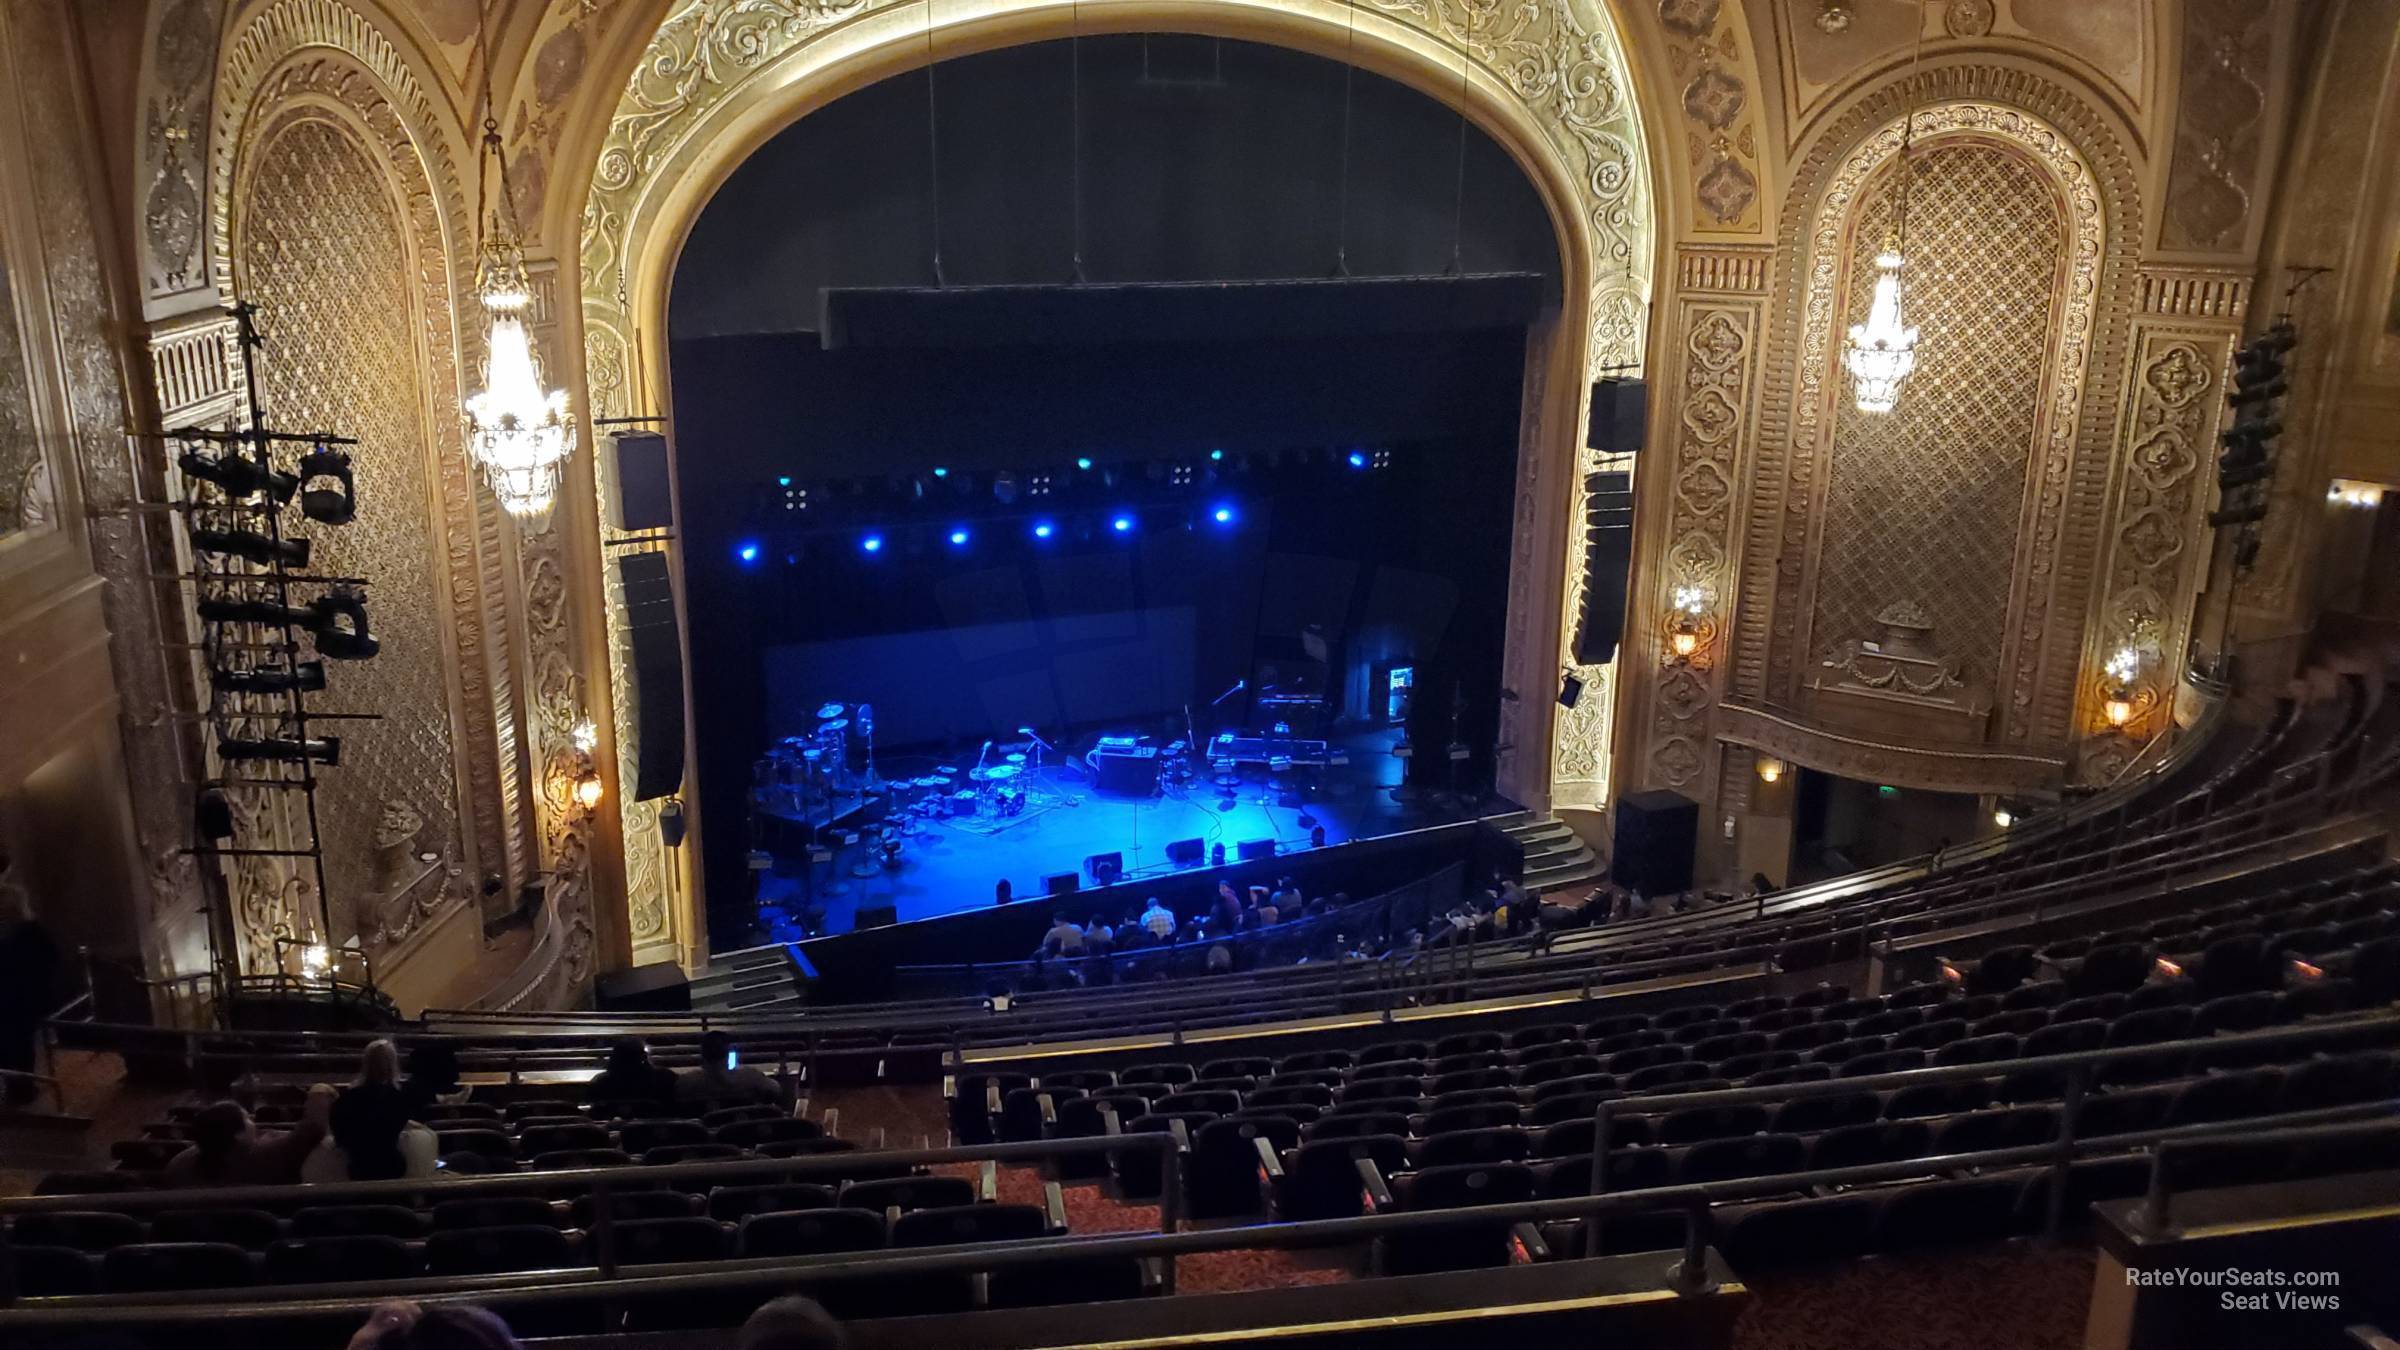 section 25, row n seat view  - paramount theatre - seattle